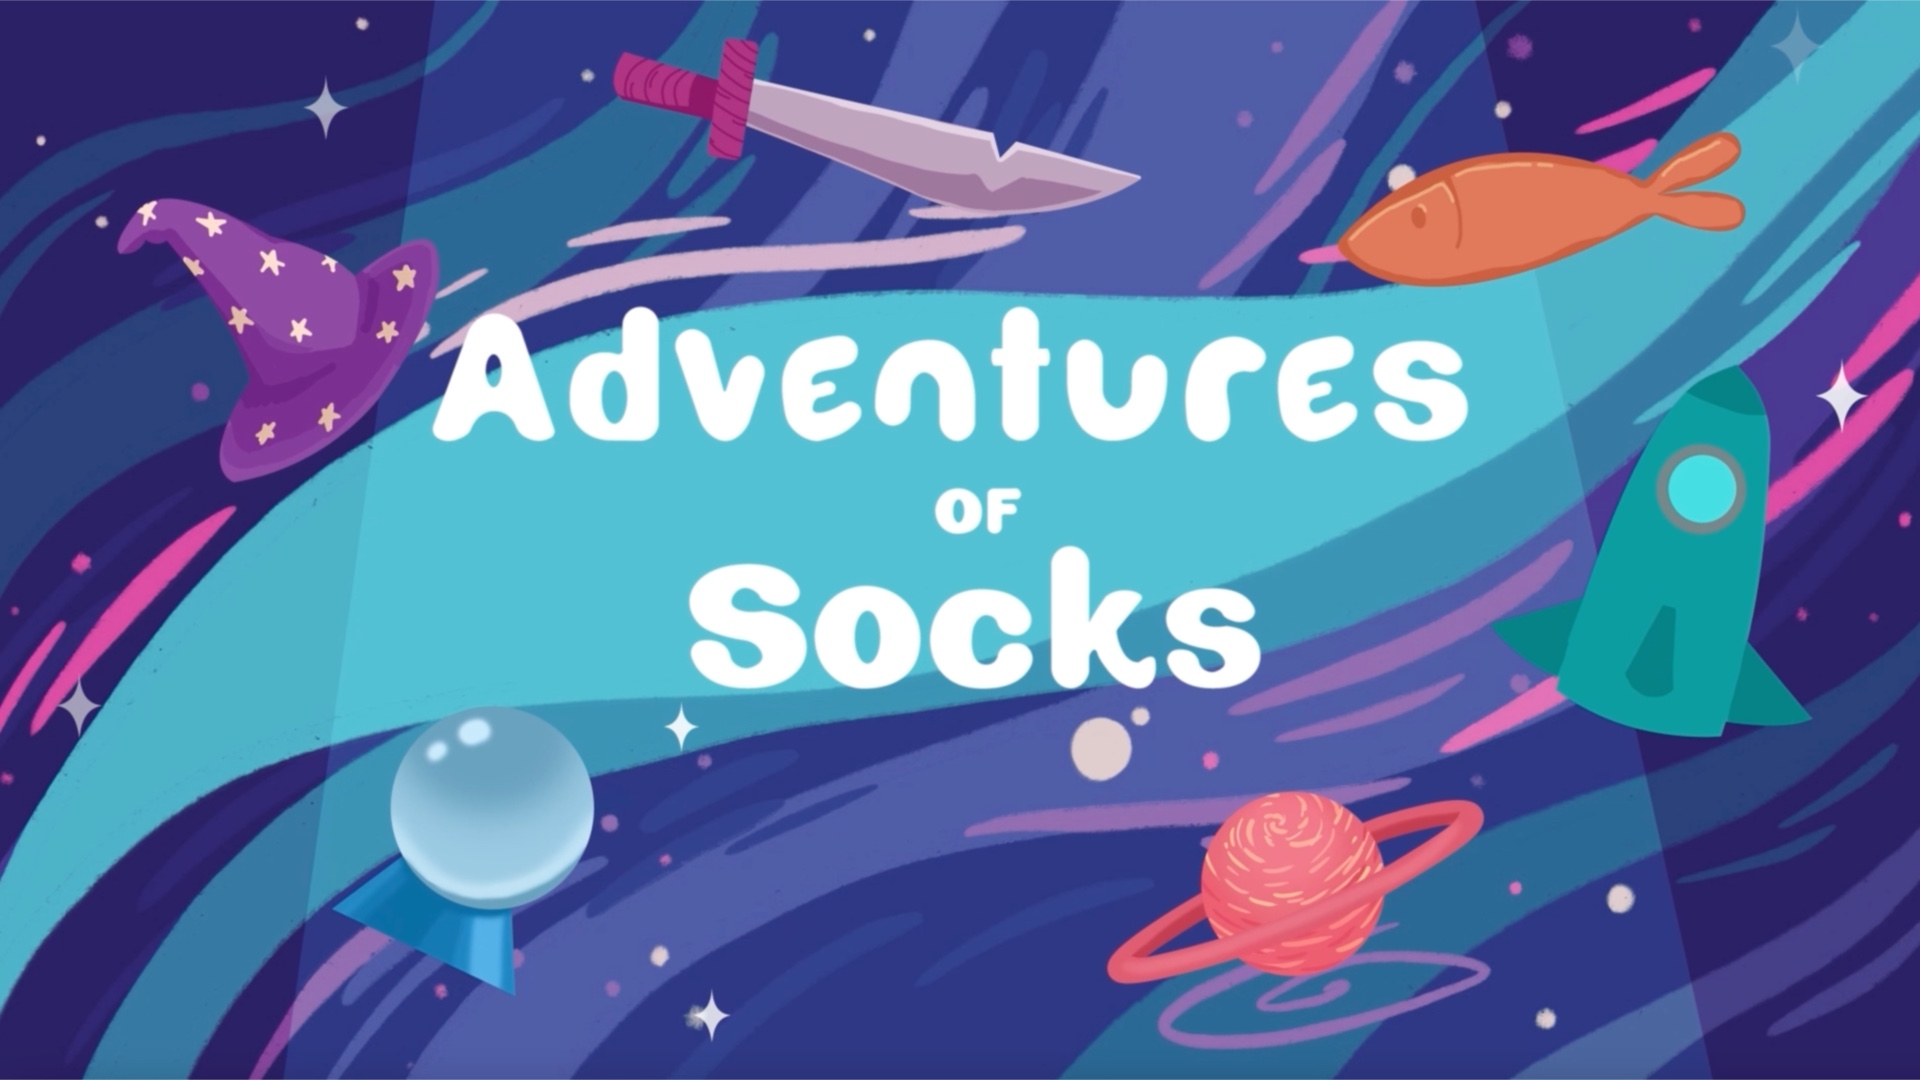 Graduate Short Film by Abbie Couzens showing Socks the cat going on a adventure in their fishing boat.